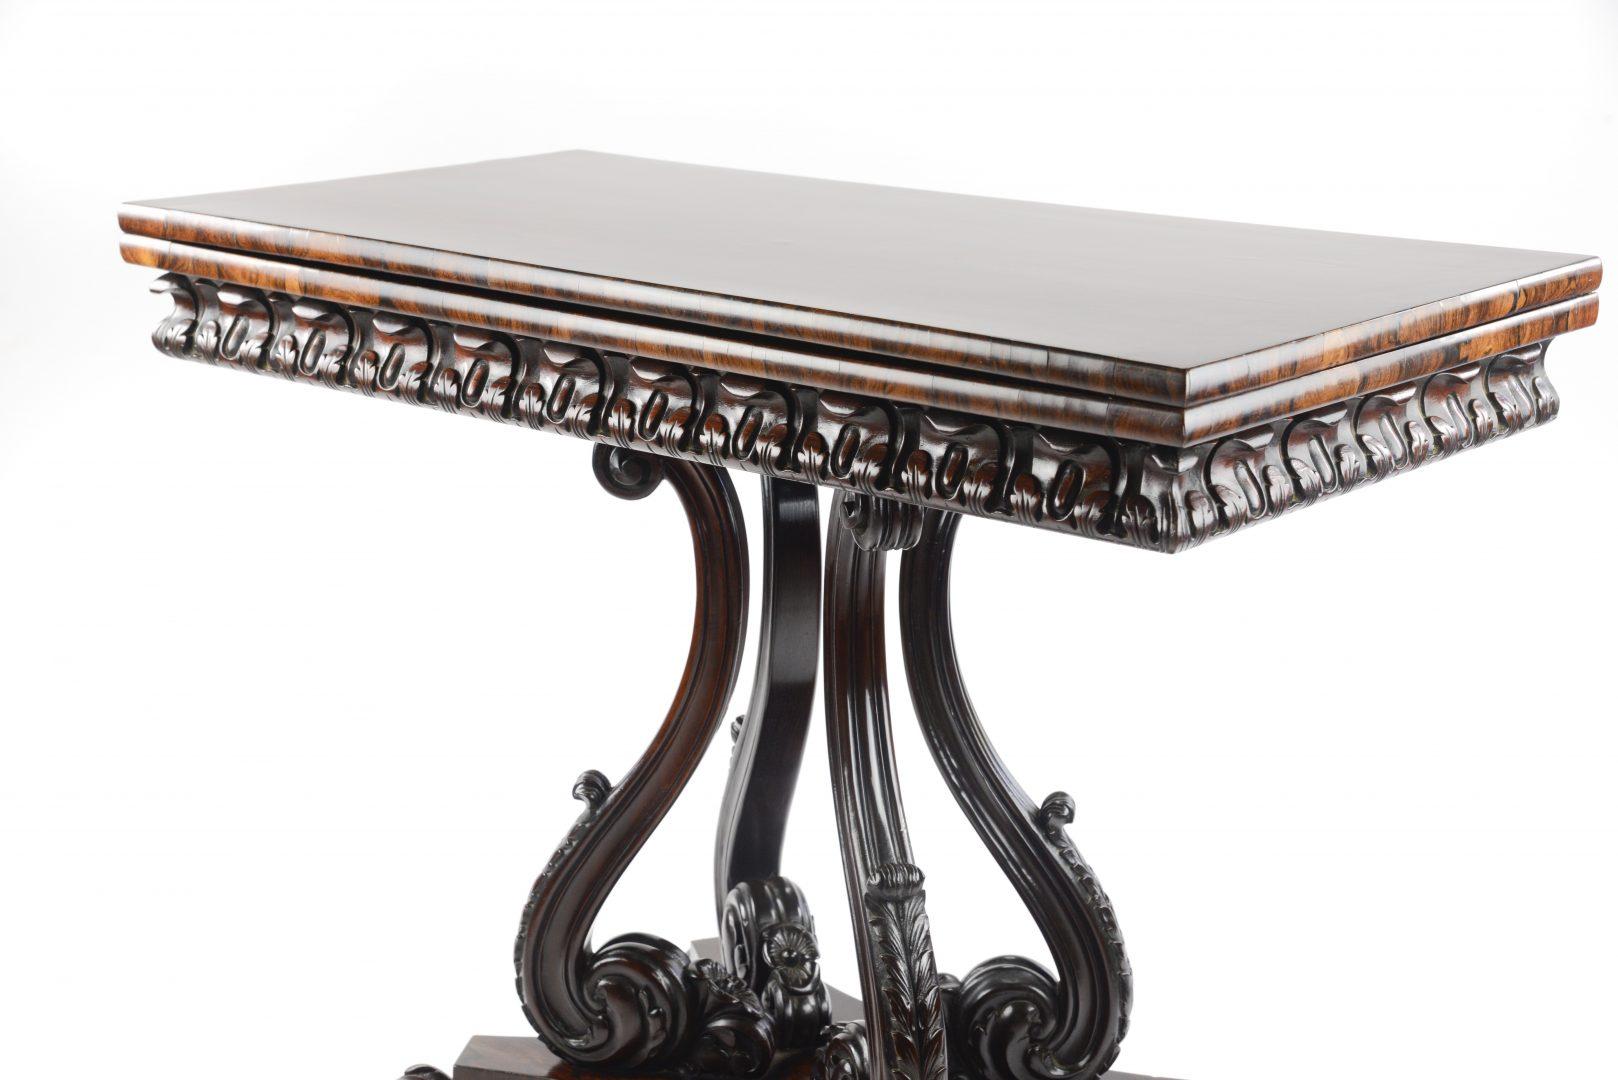 Fine quality William IV rosewood card table, attributed to Gillows, the rectangular top on an extensively carved base with four scroll supports and lions paw feet.

Gillows of Lancaster and London, also known as Gillow & Co., was an English